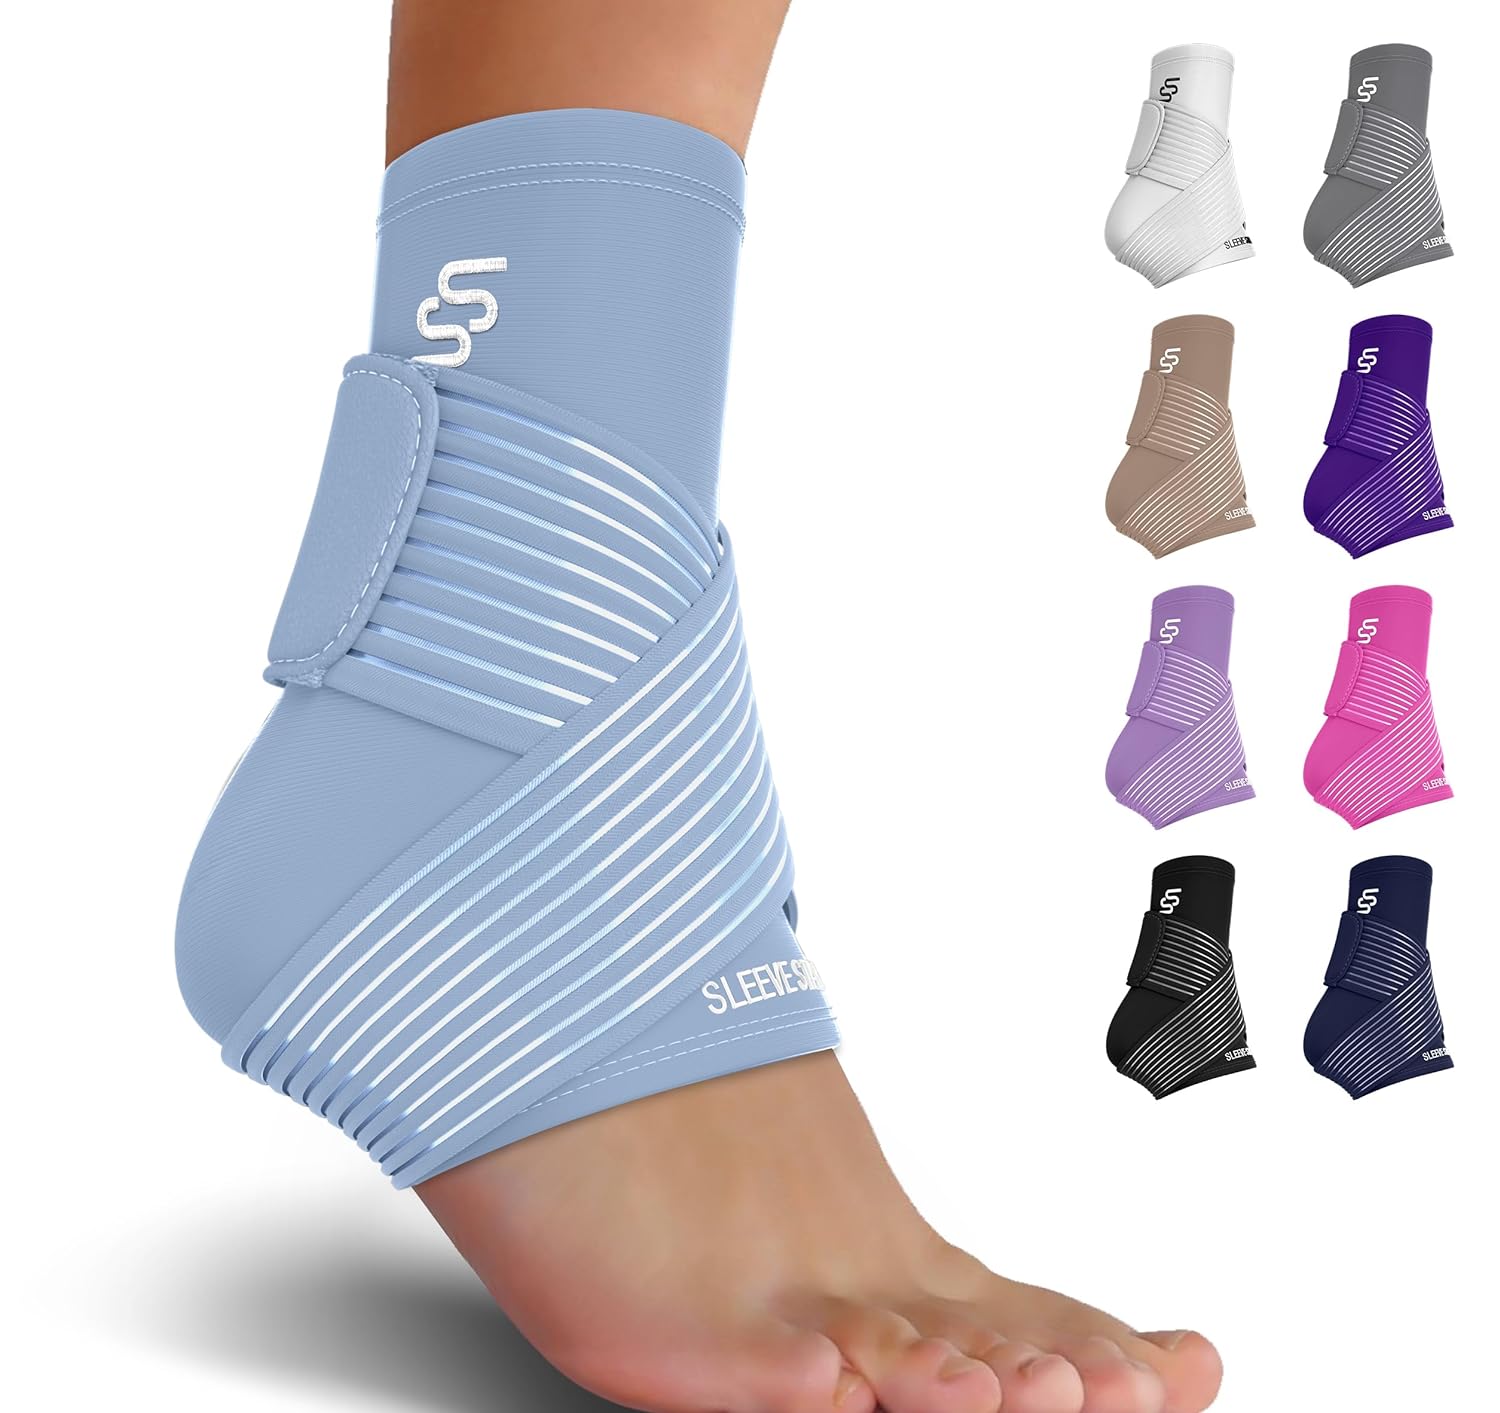 Sleeve Stars Ankle Support for Ligament Damage  Sprained Ankle, Plantar Fasciitis Support  Achilles Tendonitis Pain Relief, Ankle Brace for Women  Men w/Compression Ankle Strap (Single/Light Blue)